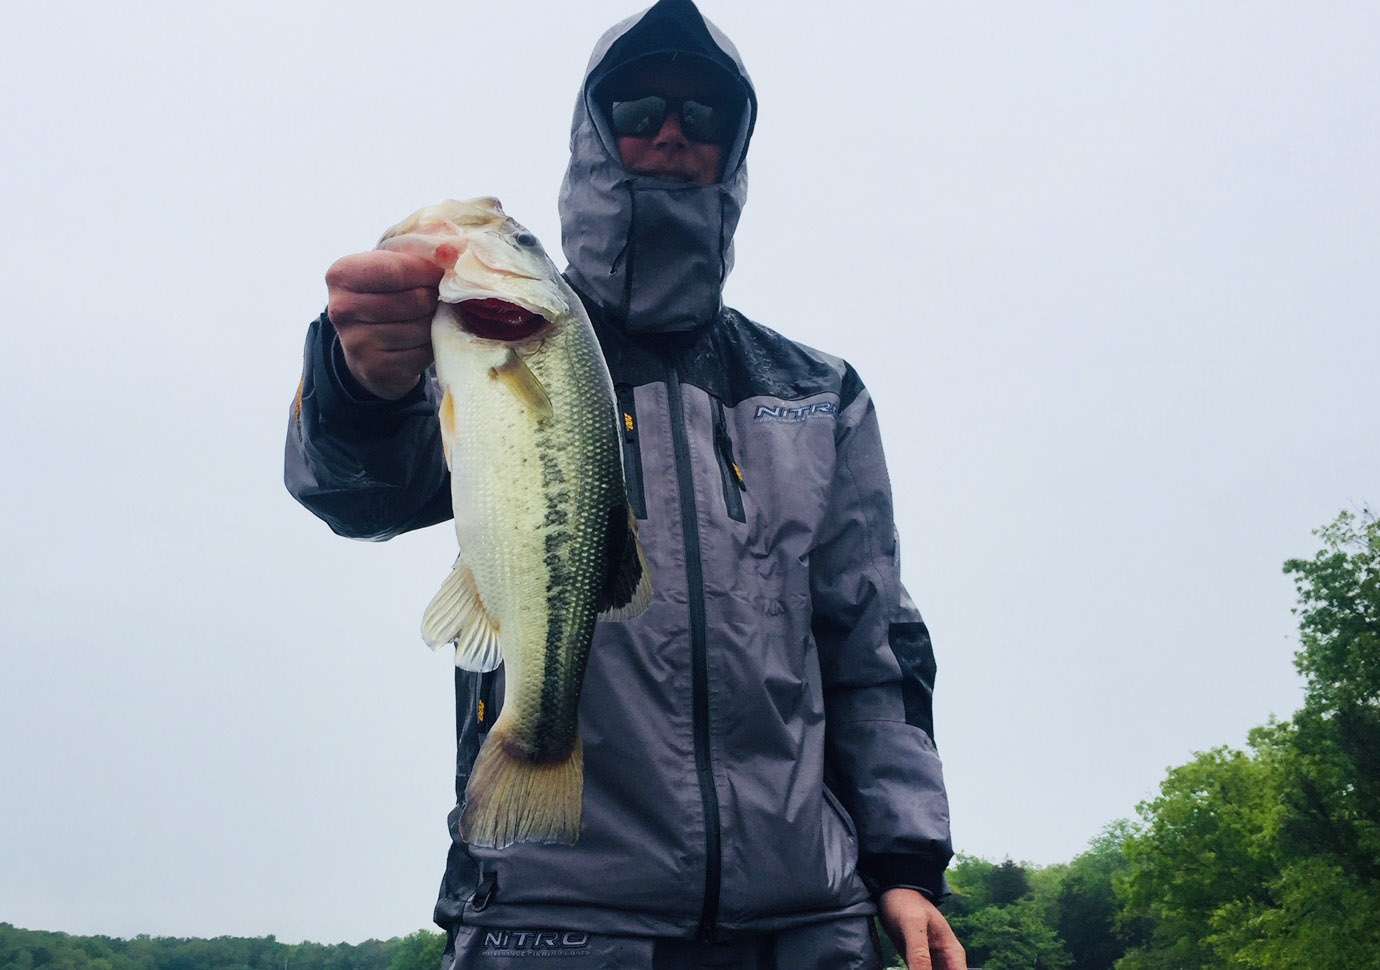 Jonathon VanDam is on the board with a 2-pounder. Starting to see some shad moving around in the area he is fishing.